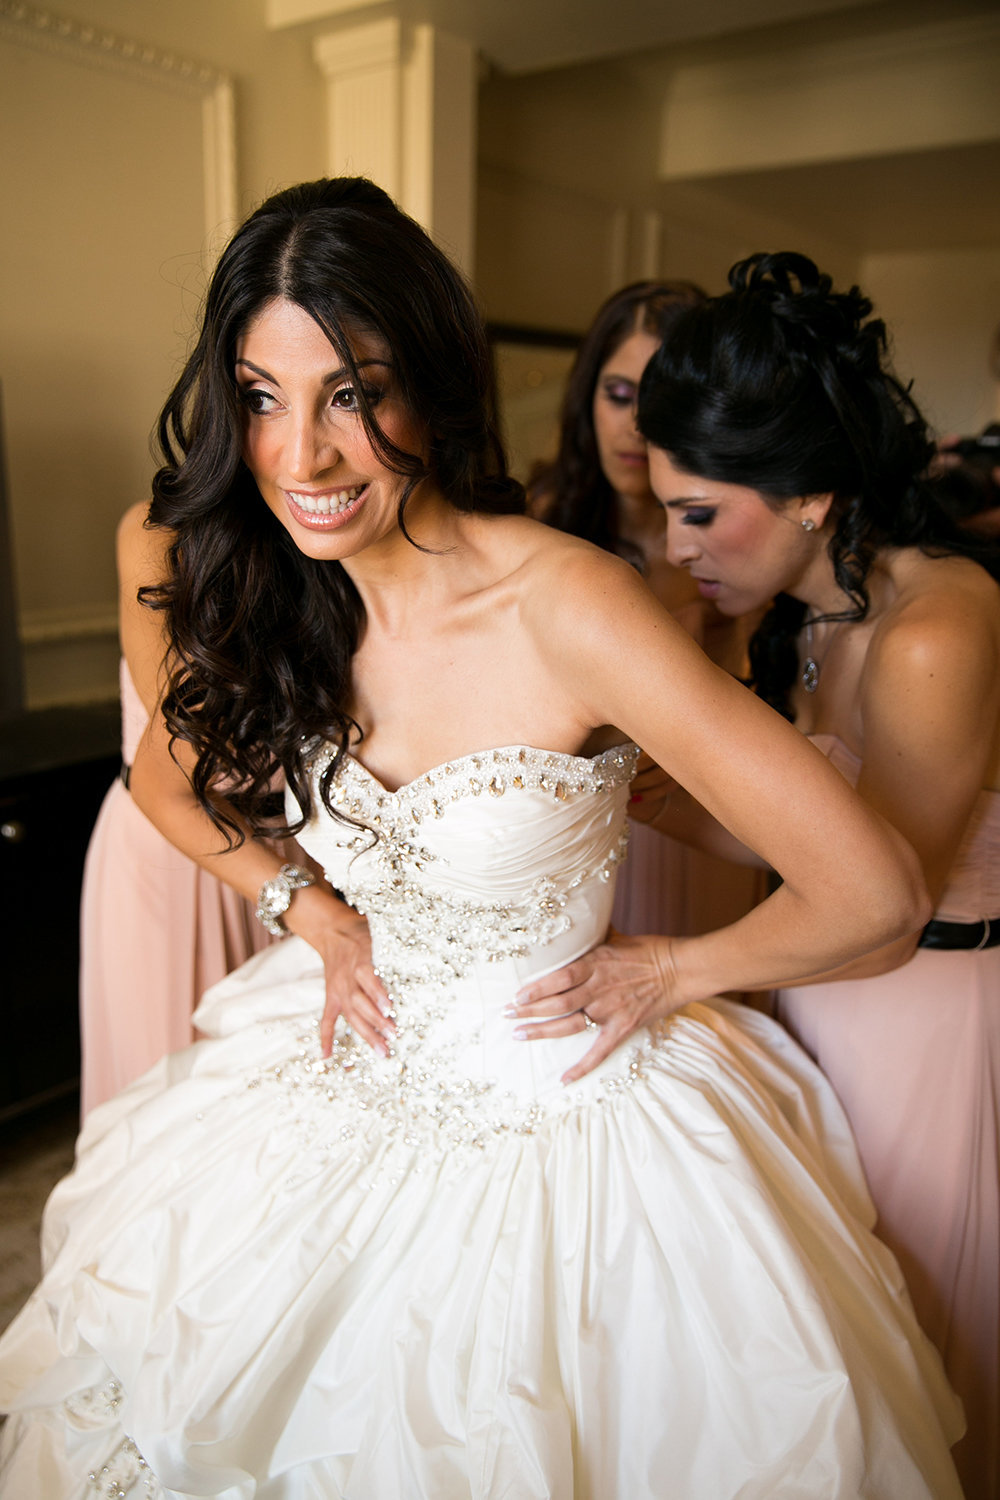 Bridesmaids help a very excited bride into her dress